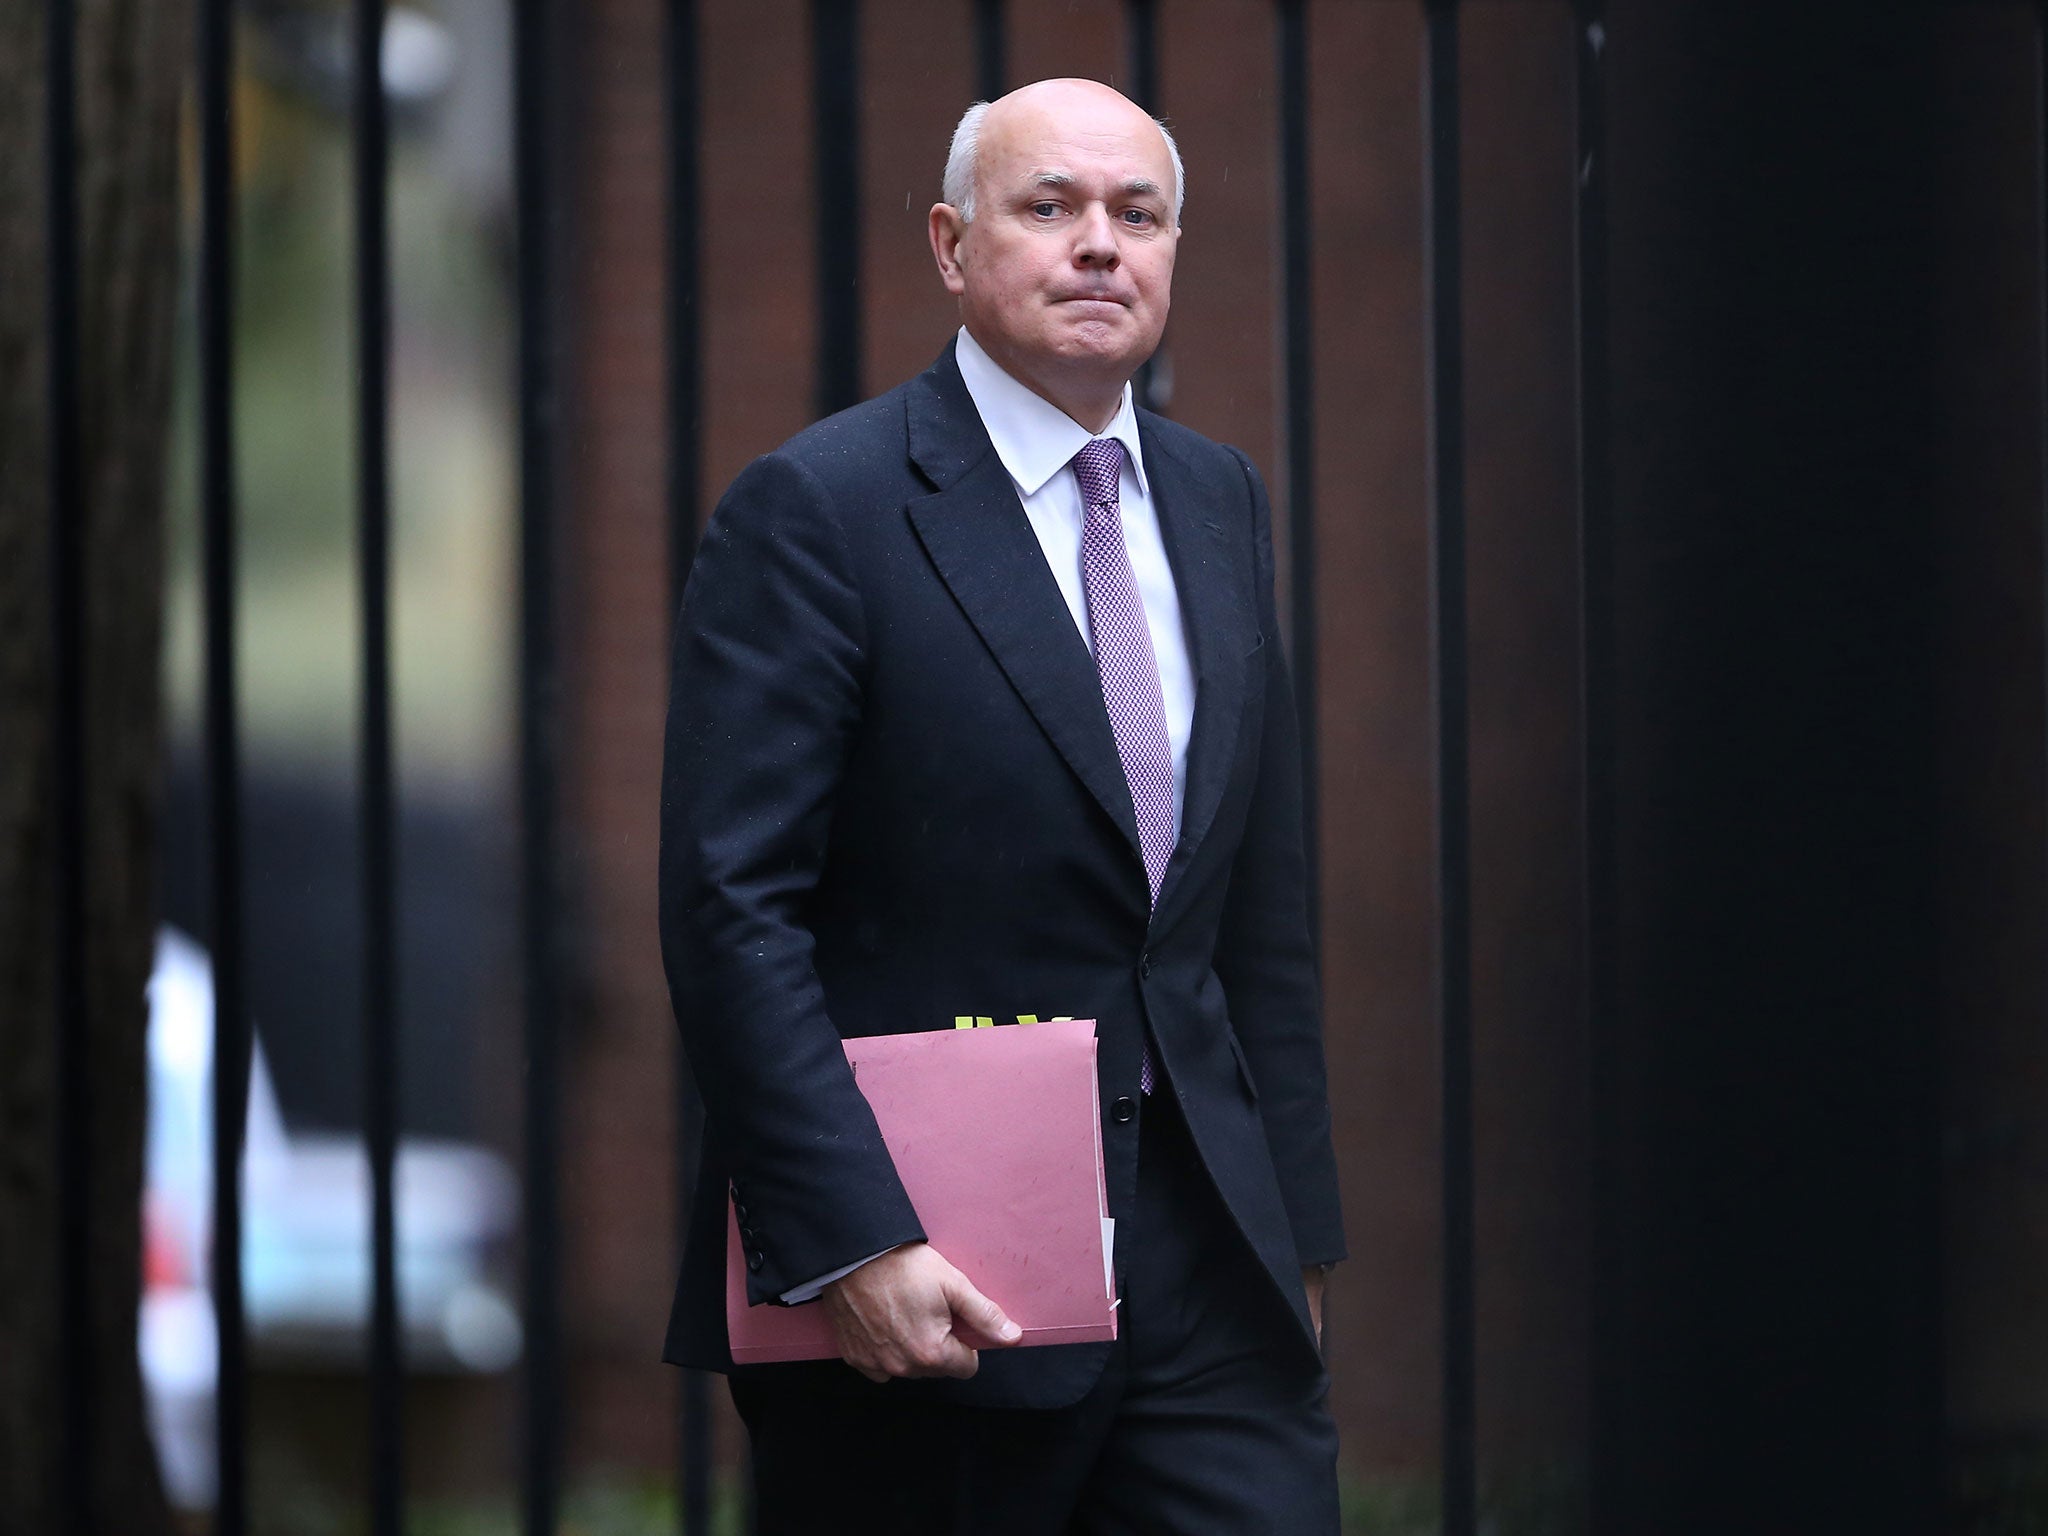 Iain Duncan Smith, the reappointed Works and Pensions Secretary, will be at the forefront of finding benefit cuts